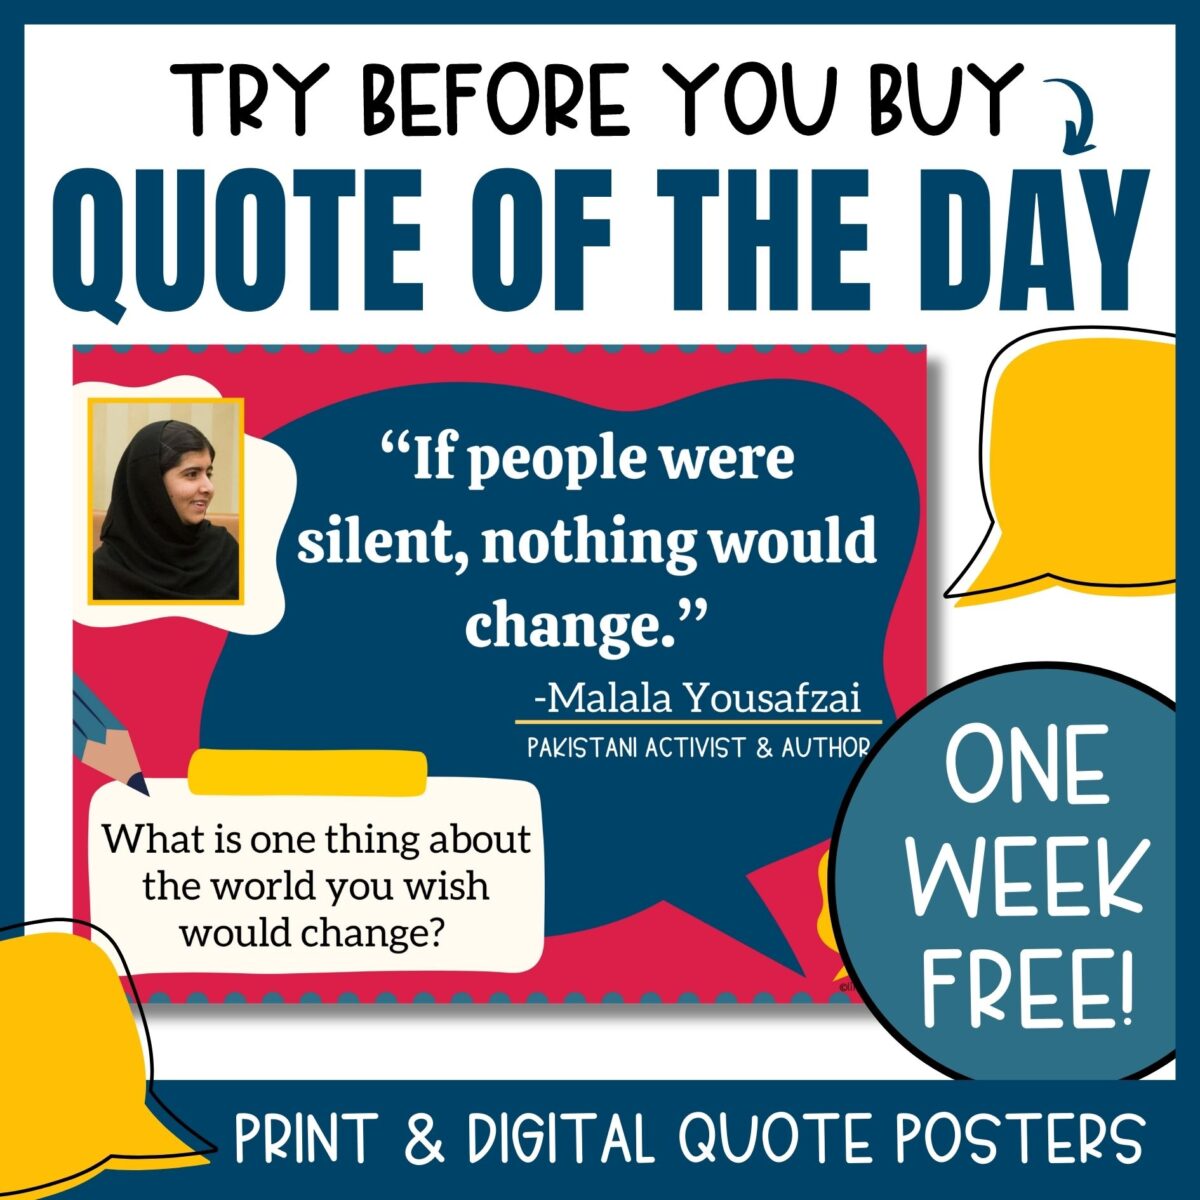 Quote of the Day Activity